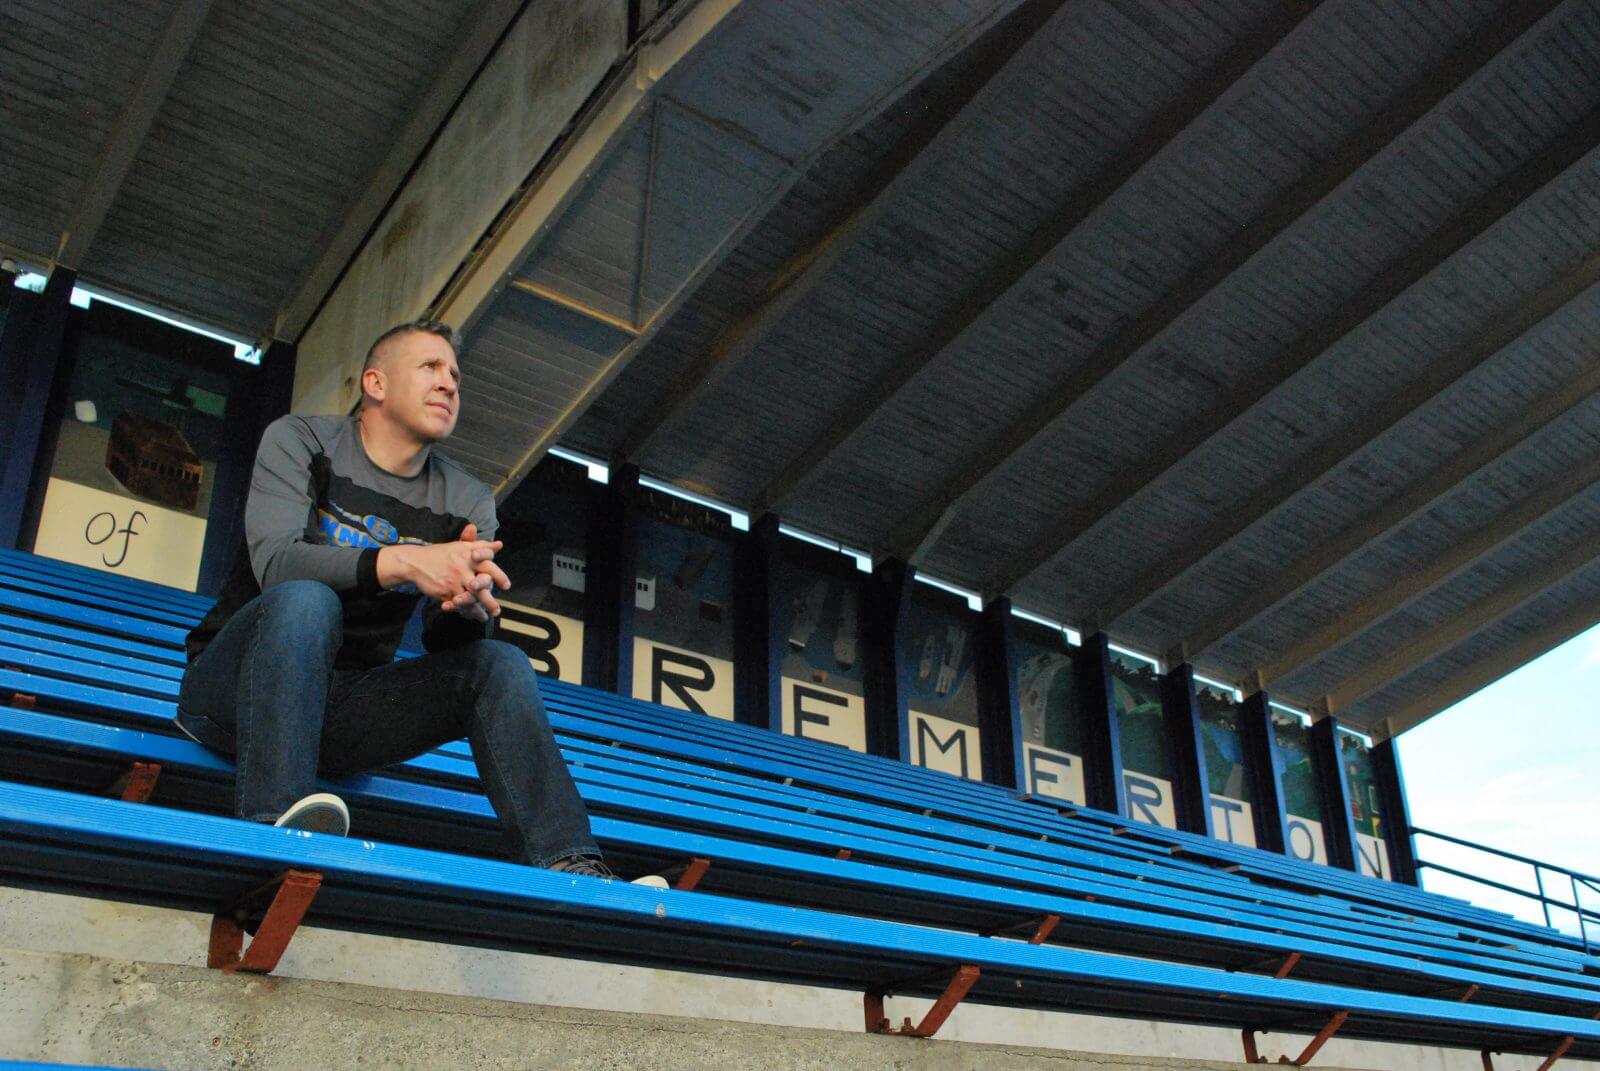 Former assistant varsity football coach Joe Kennedy sits in the stands of the Bremerton High School football field.